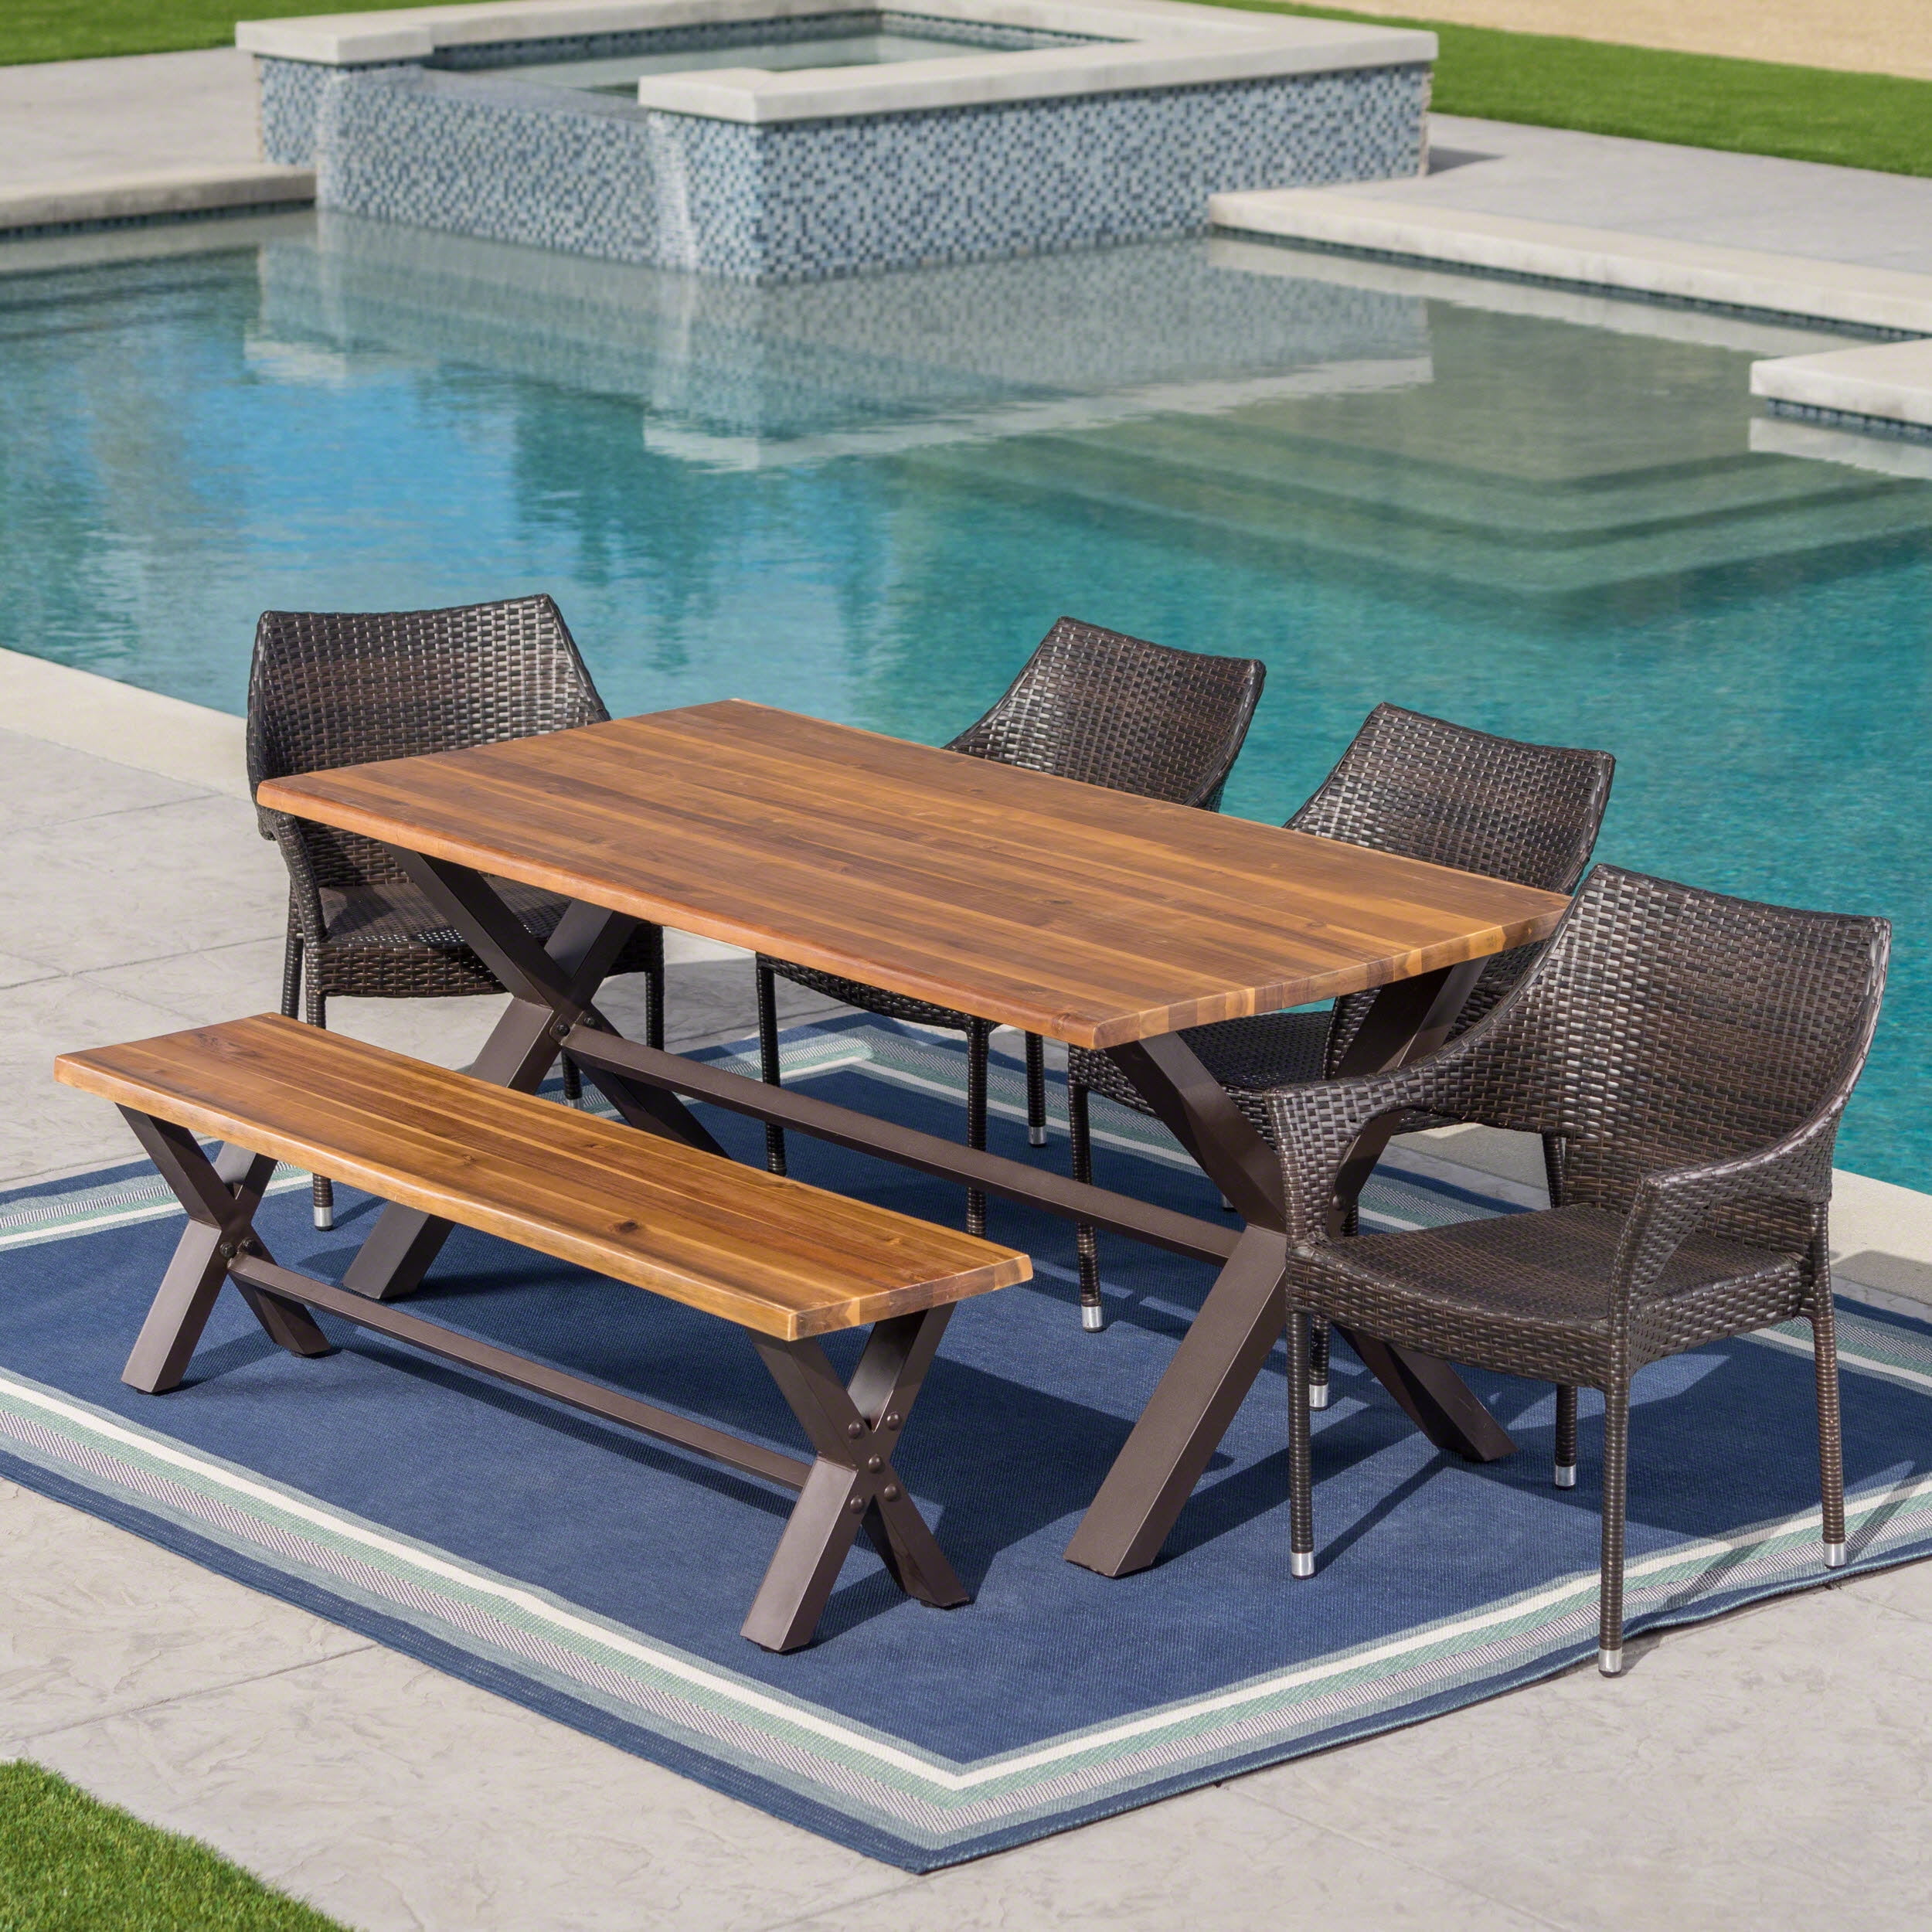 Charleigh Outdoor 6 Piece Acacia Wood Dining Set with Wicker Stacking ...